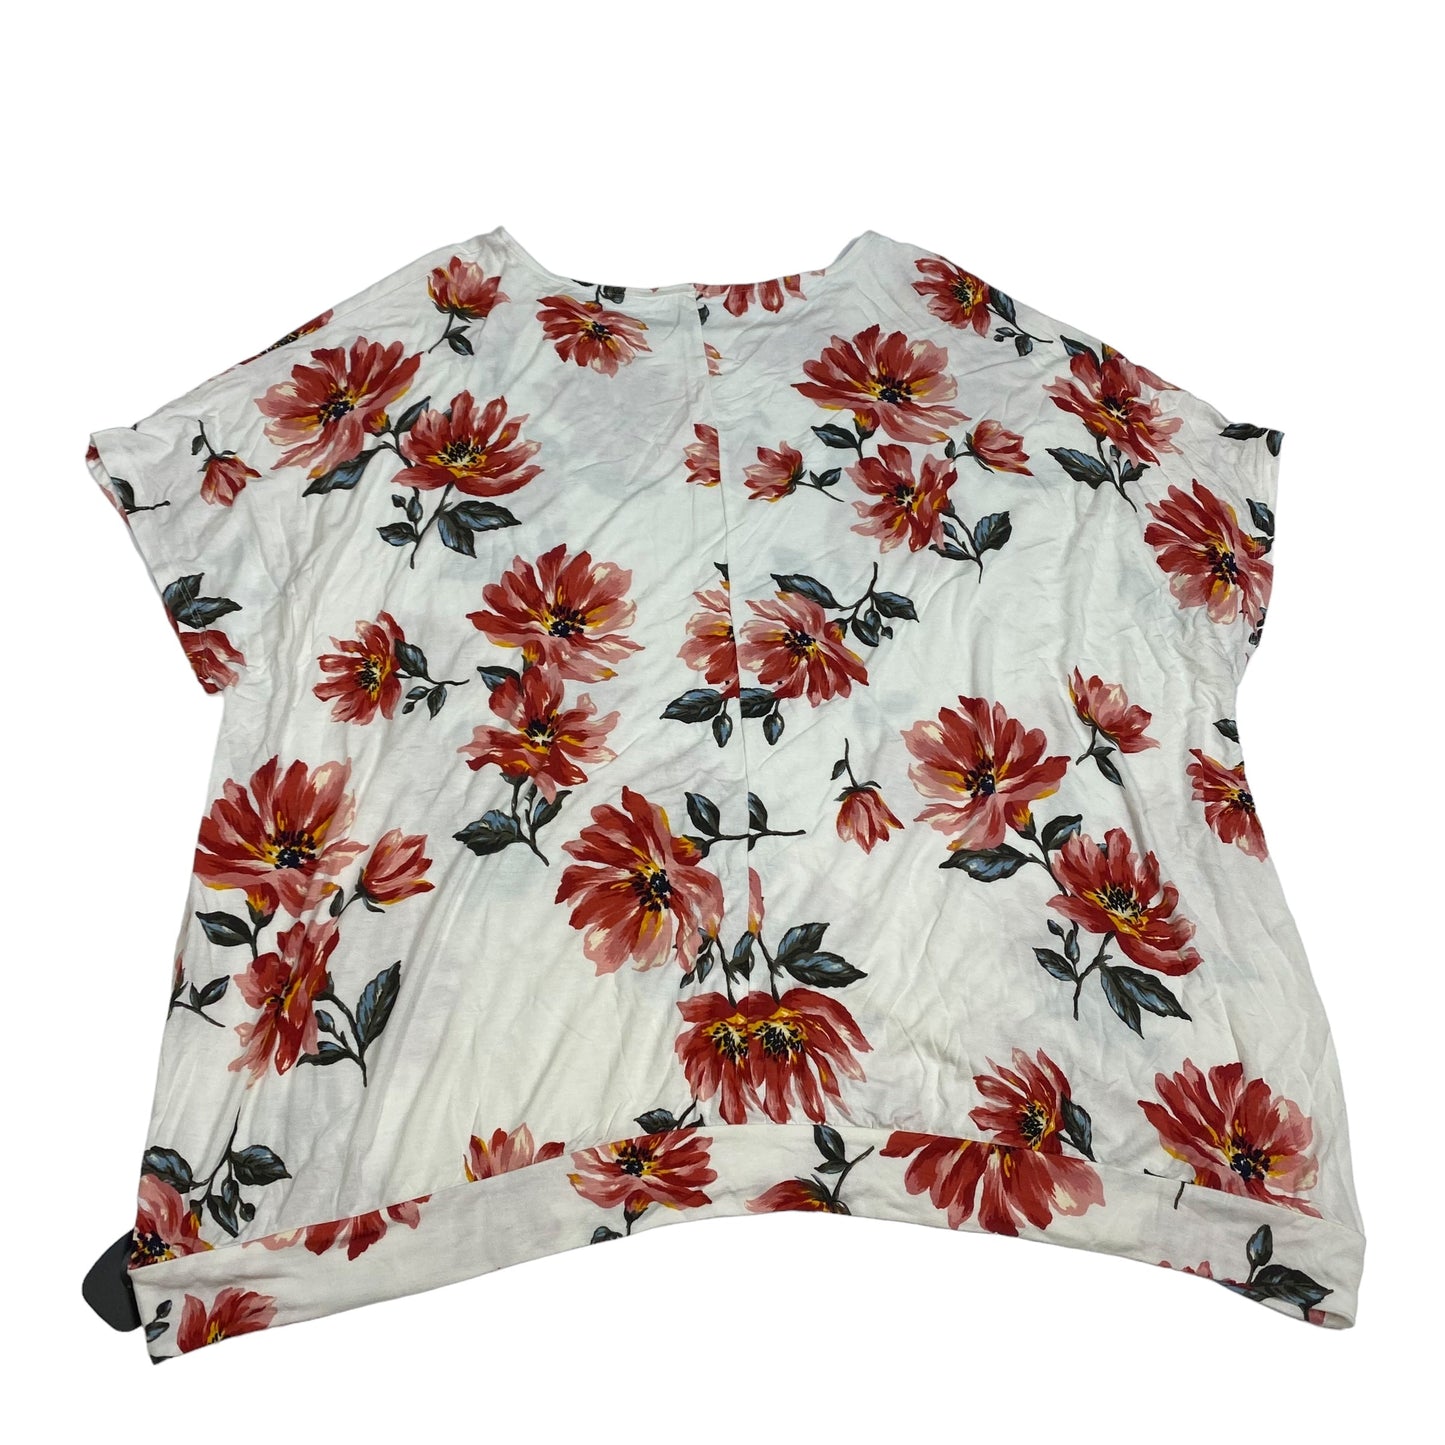 Red & White Top Short Sleeve Lane Bryant, Size 4x